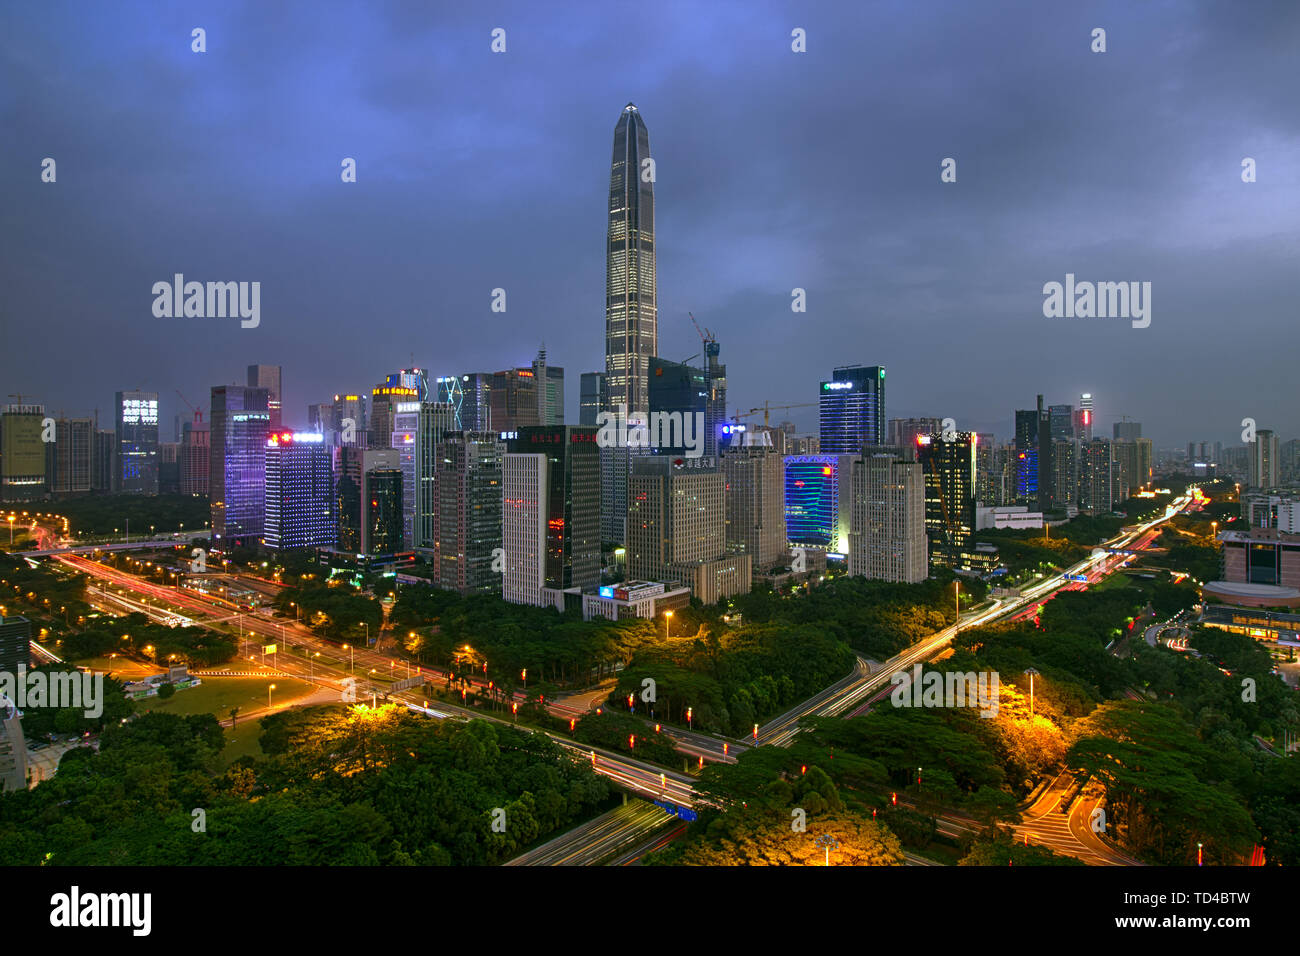 Night view of the CBD business circle skyline in central Shenzhen Stock Photo